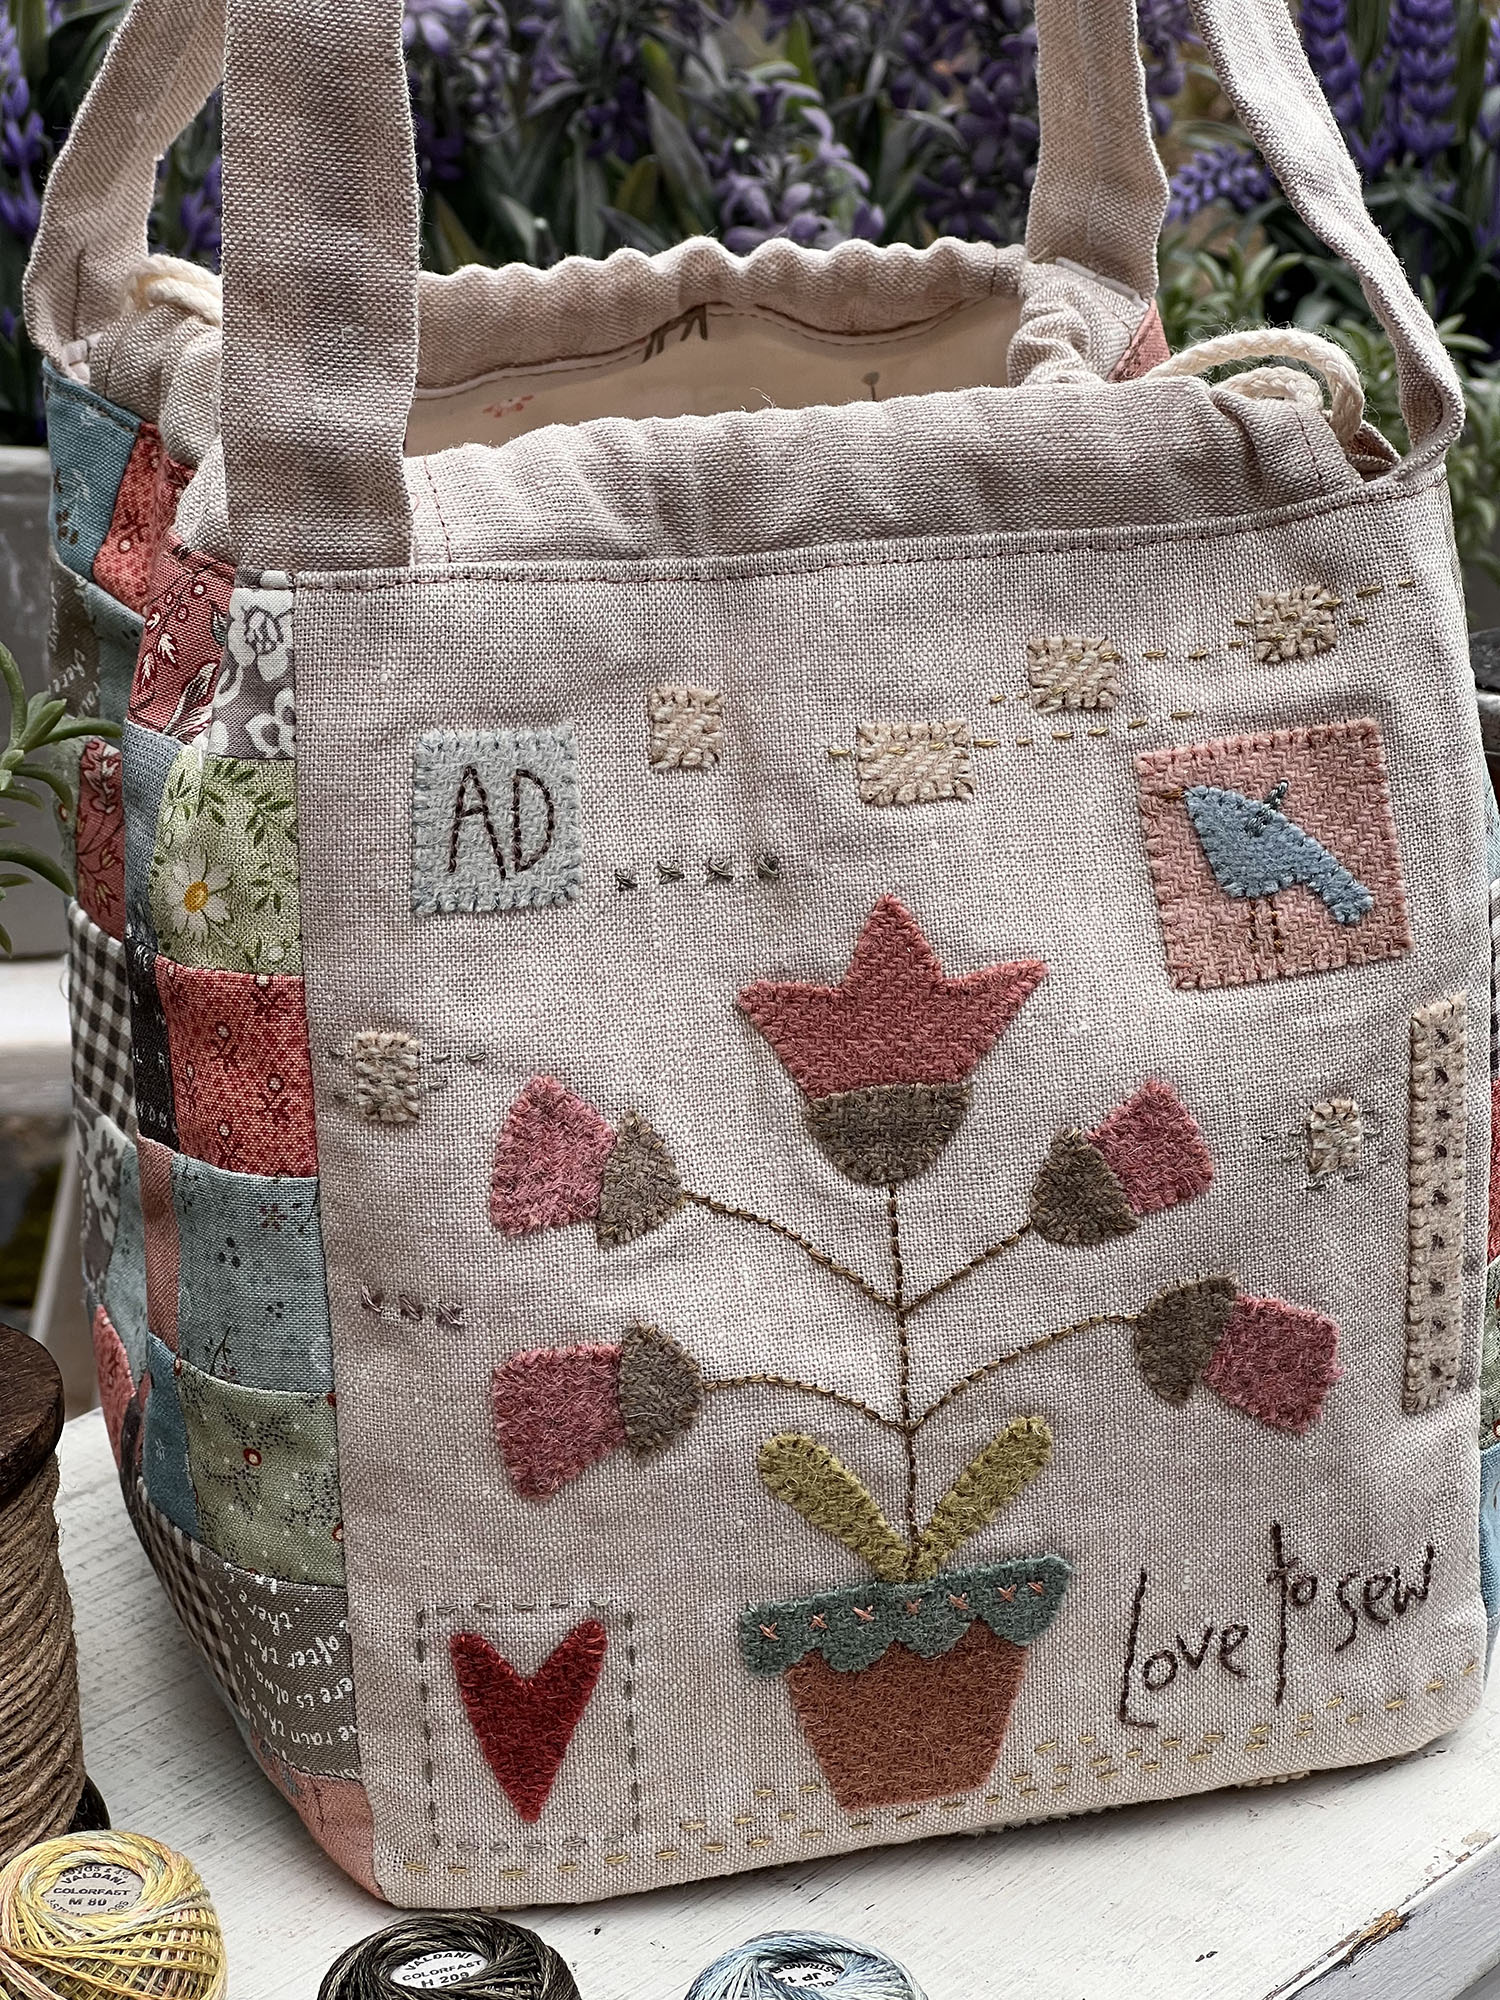 B029, Love to Sew Drawstring Bag, Pattern by Anni Downs Hatched and Patched